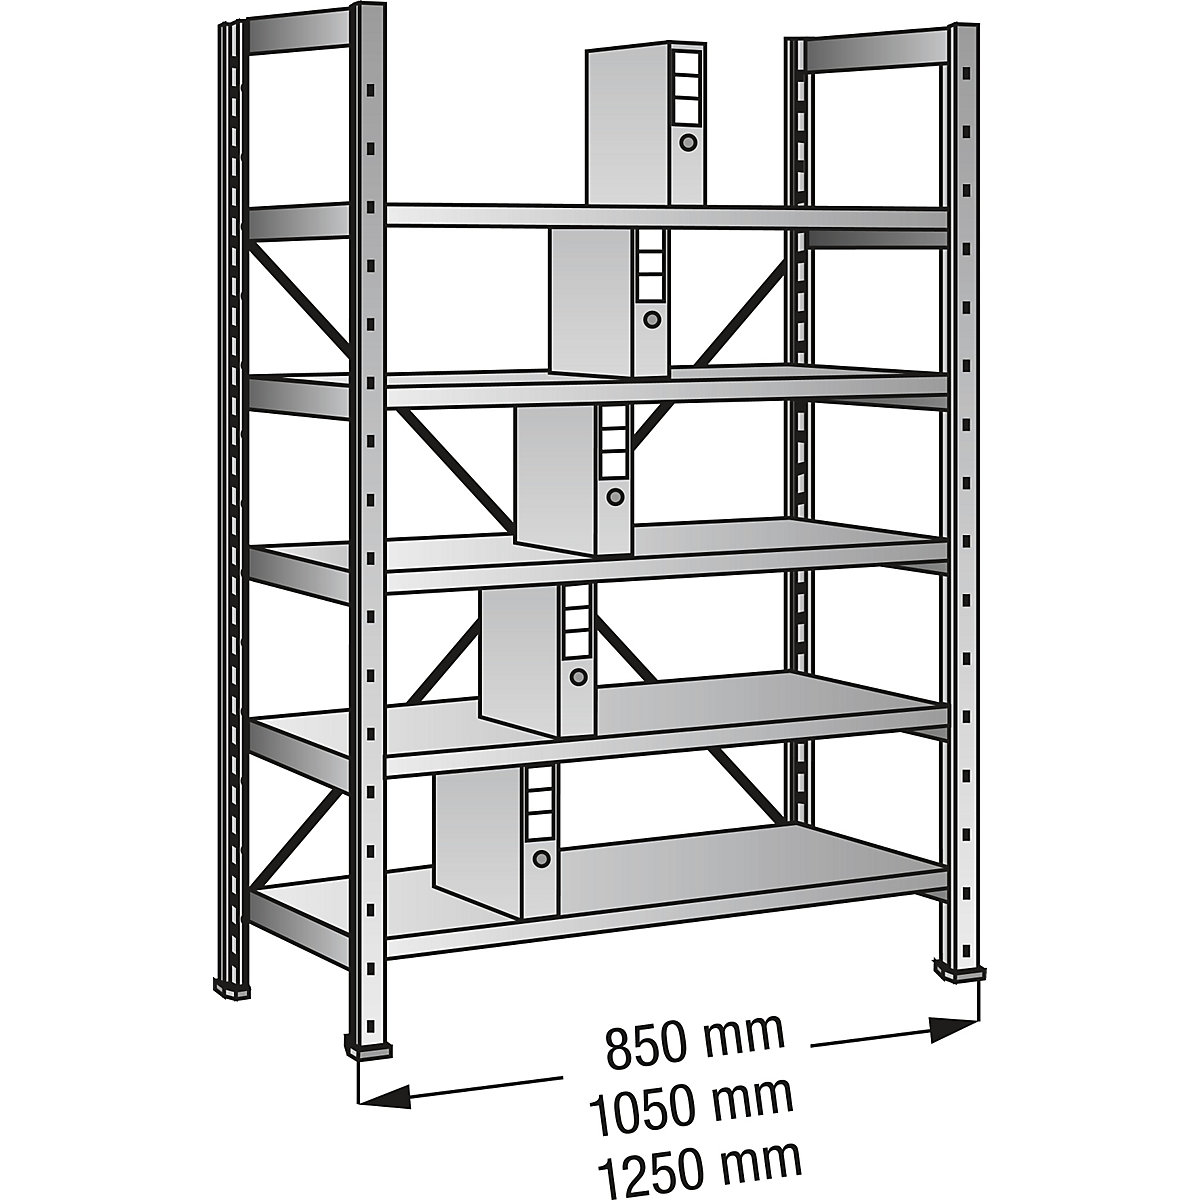 Boltless shelving units for files and archives, zinc plated, height 1920 mm, single sided, shelf WxD 1200 x 300 mm, standard shelf unit-3